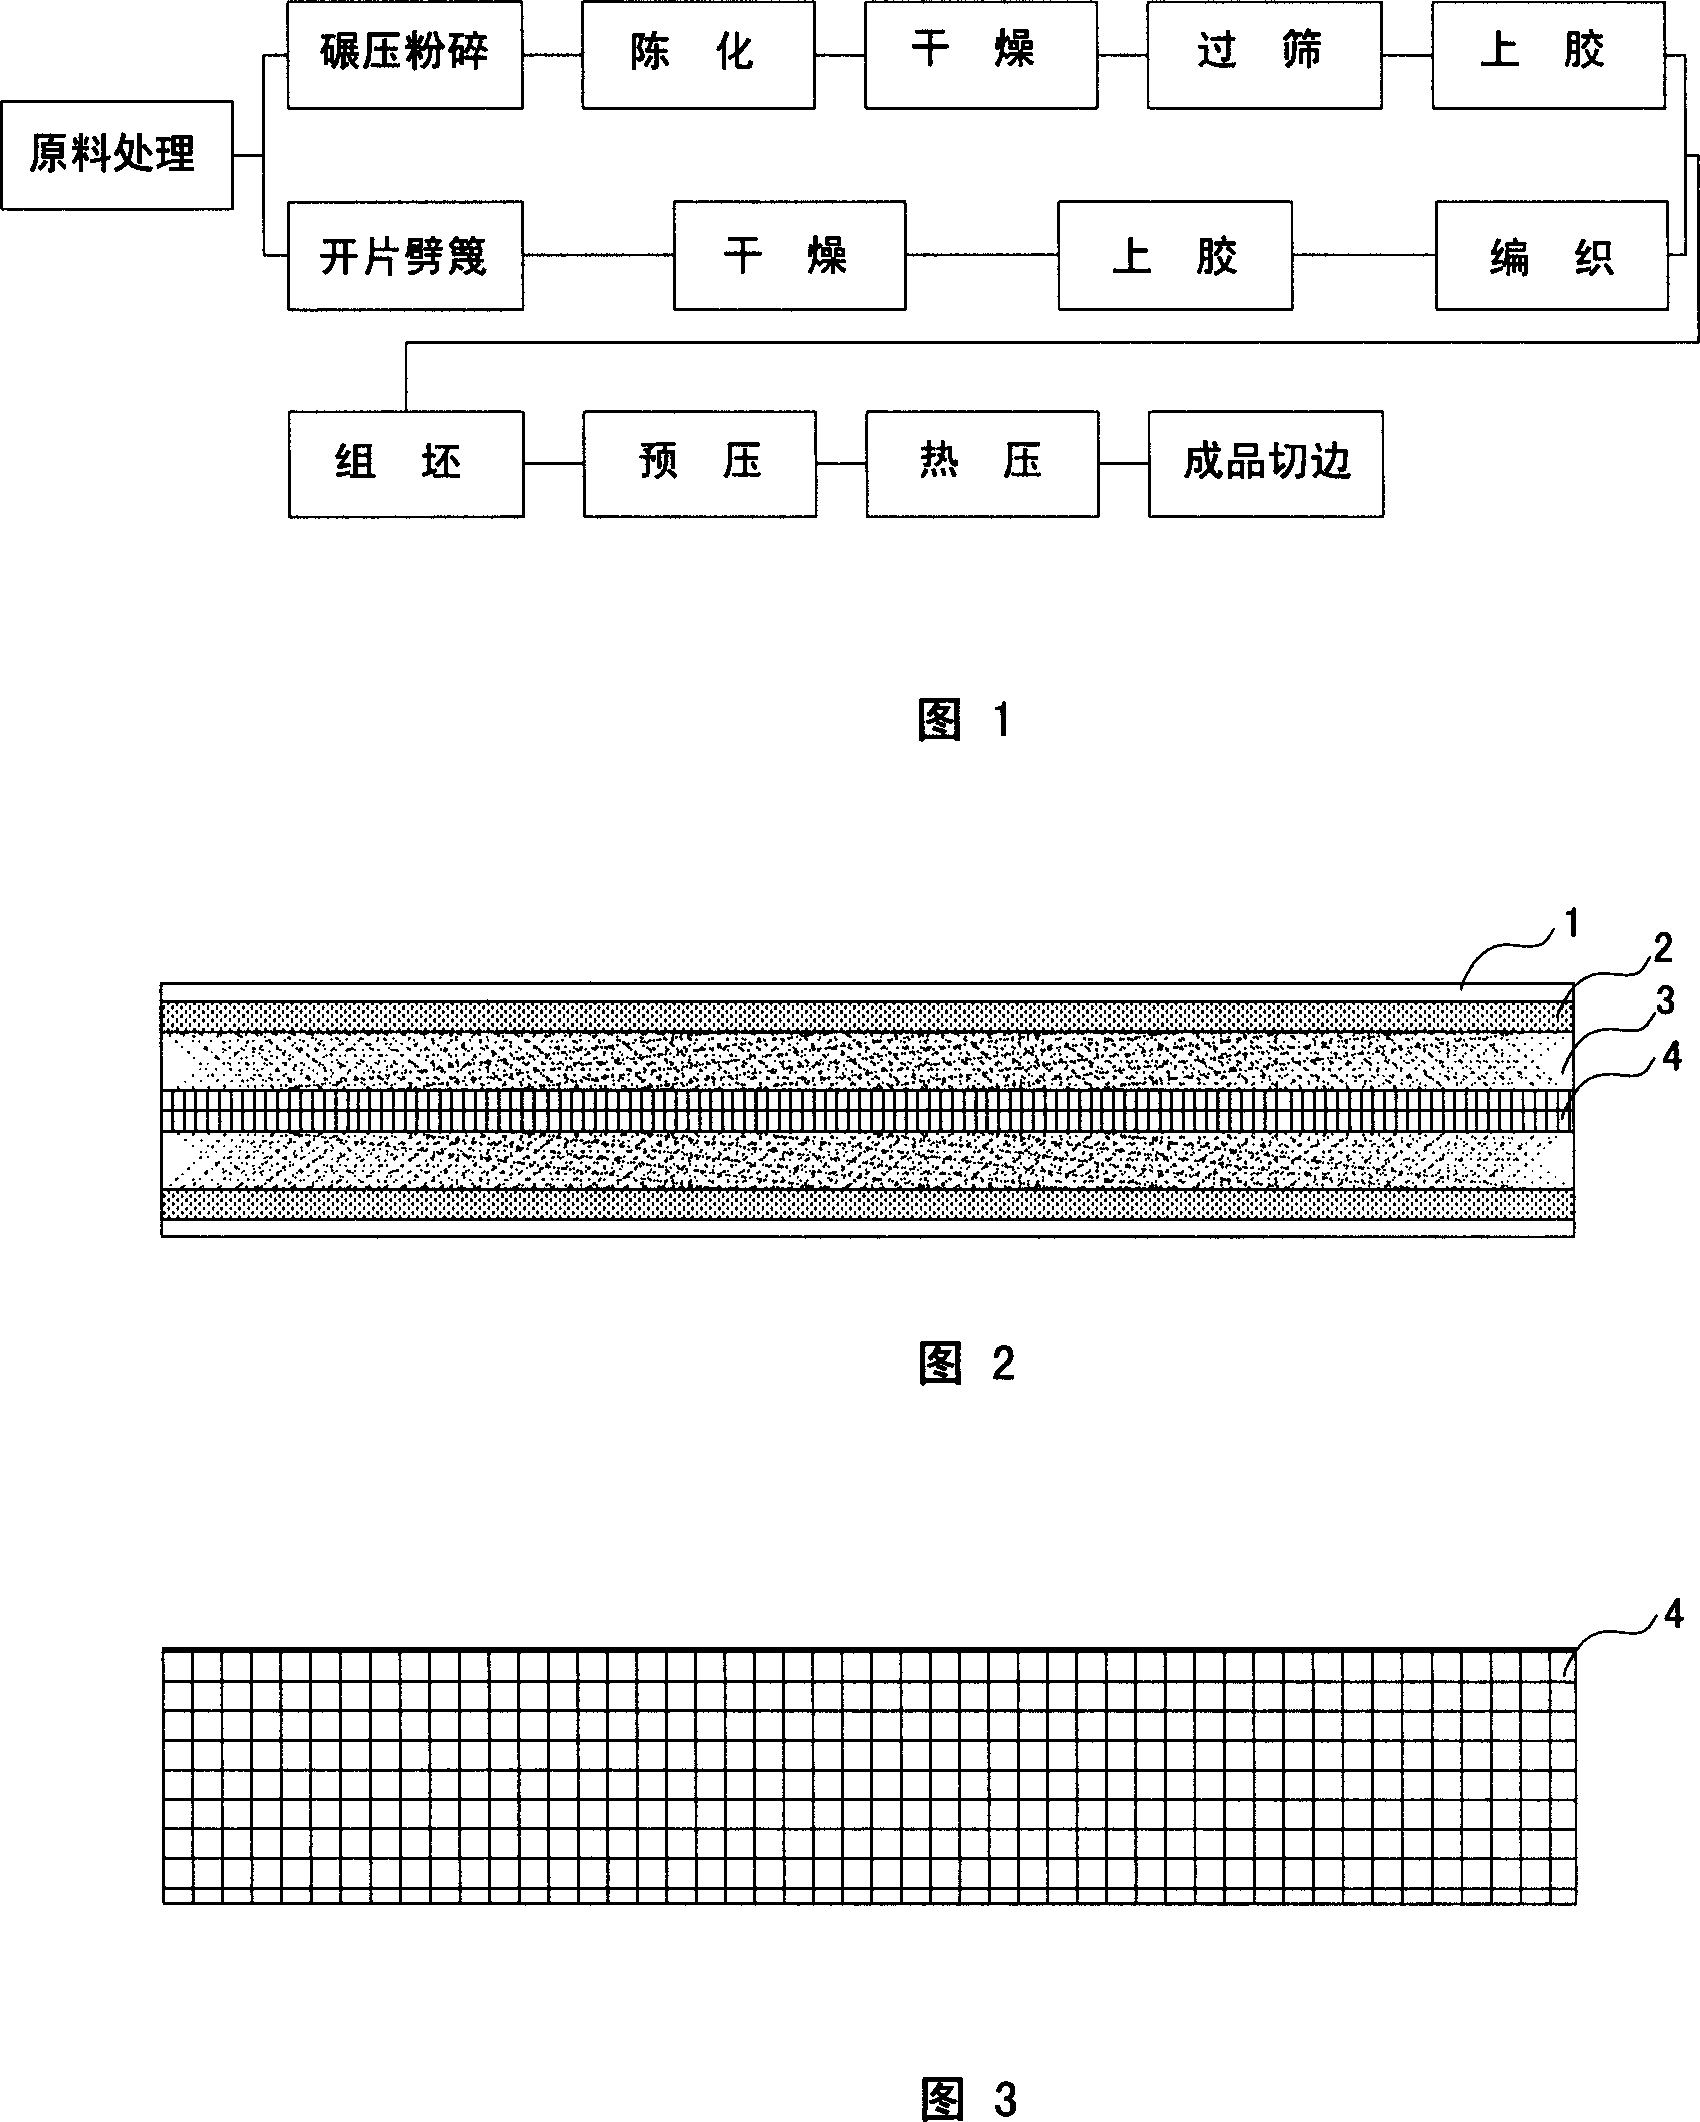 Composite board of small pieces of bamboo reinforcement, and manufacturing method